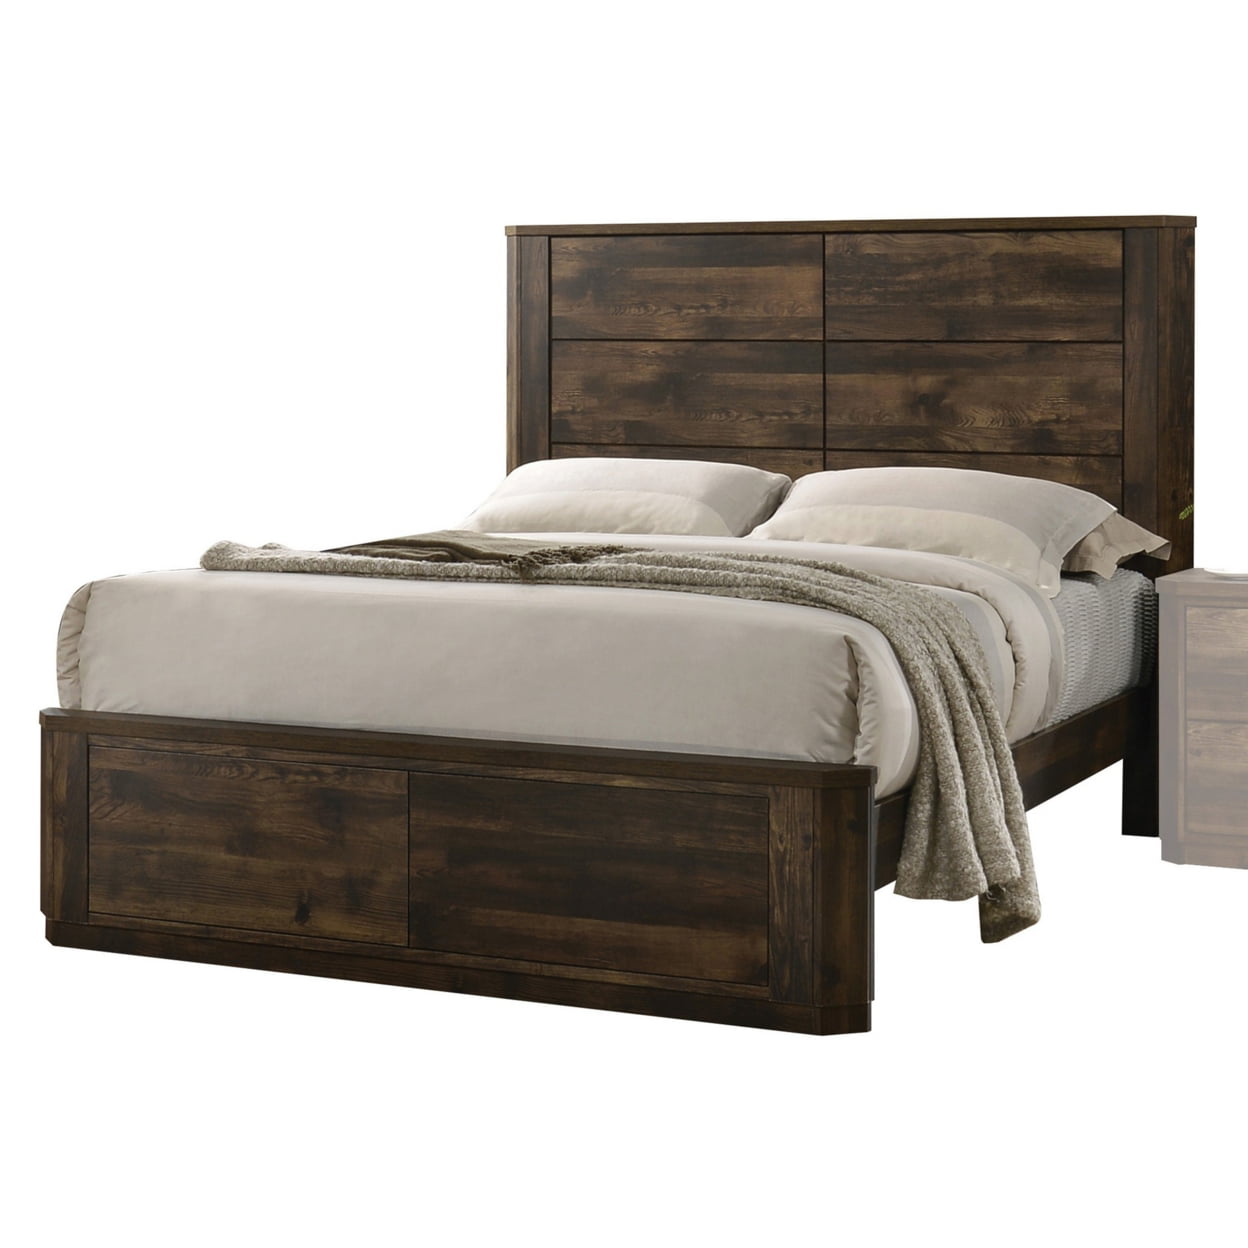 BM221390 Transitional Style Bed with Panel Design Headboard, Rustic Brown - Queen Size -  Benjara